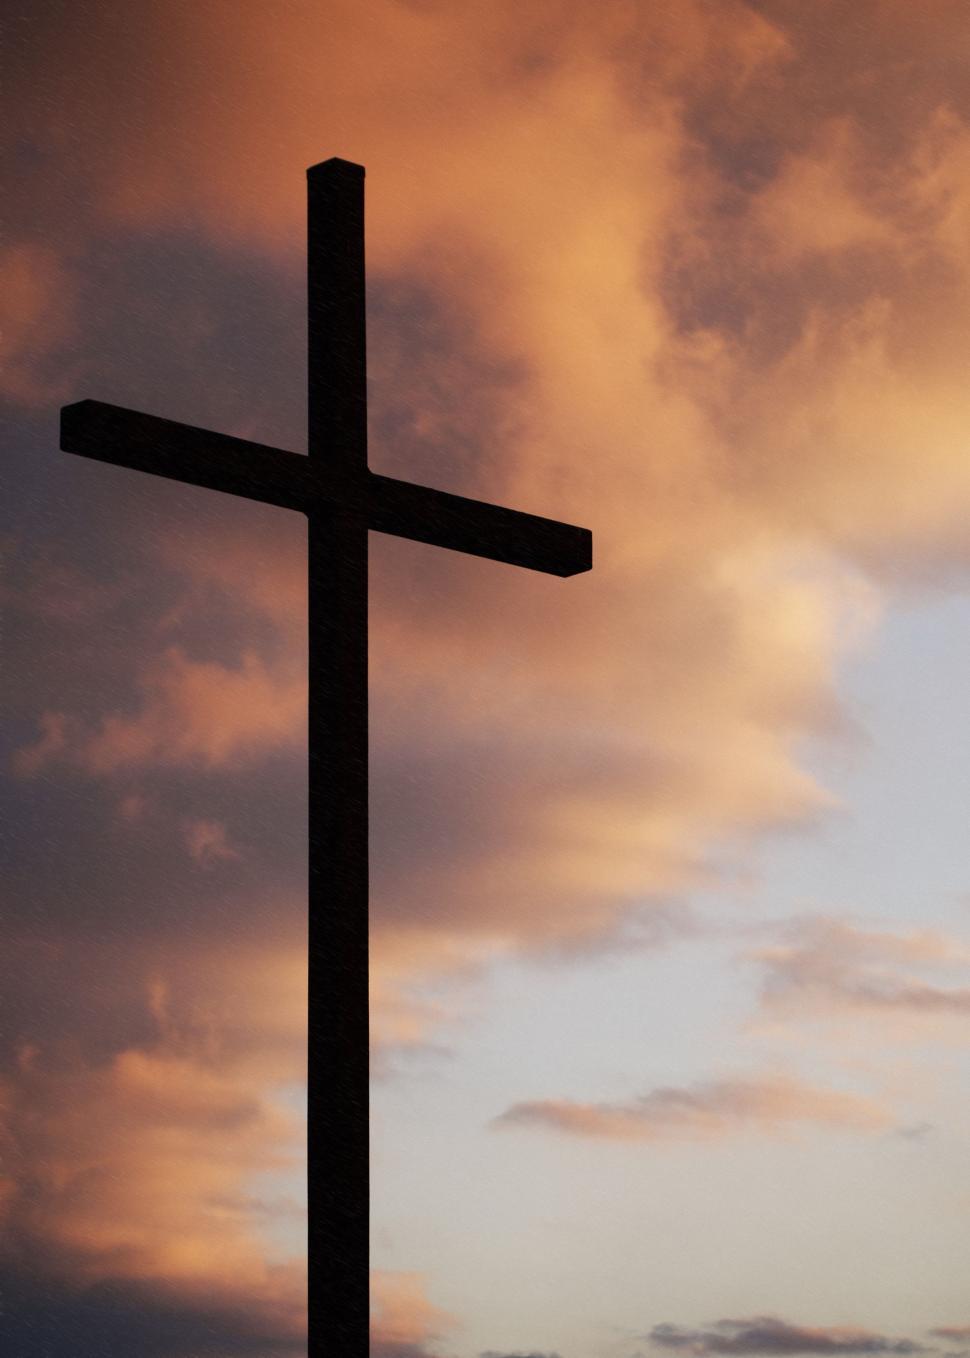 Free Image of Cross on Top of a Hill Under Cloudy Sky 